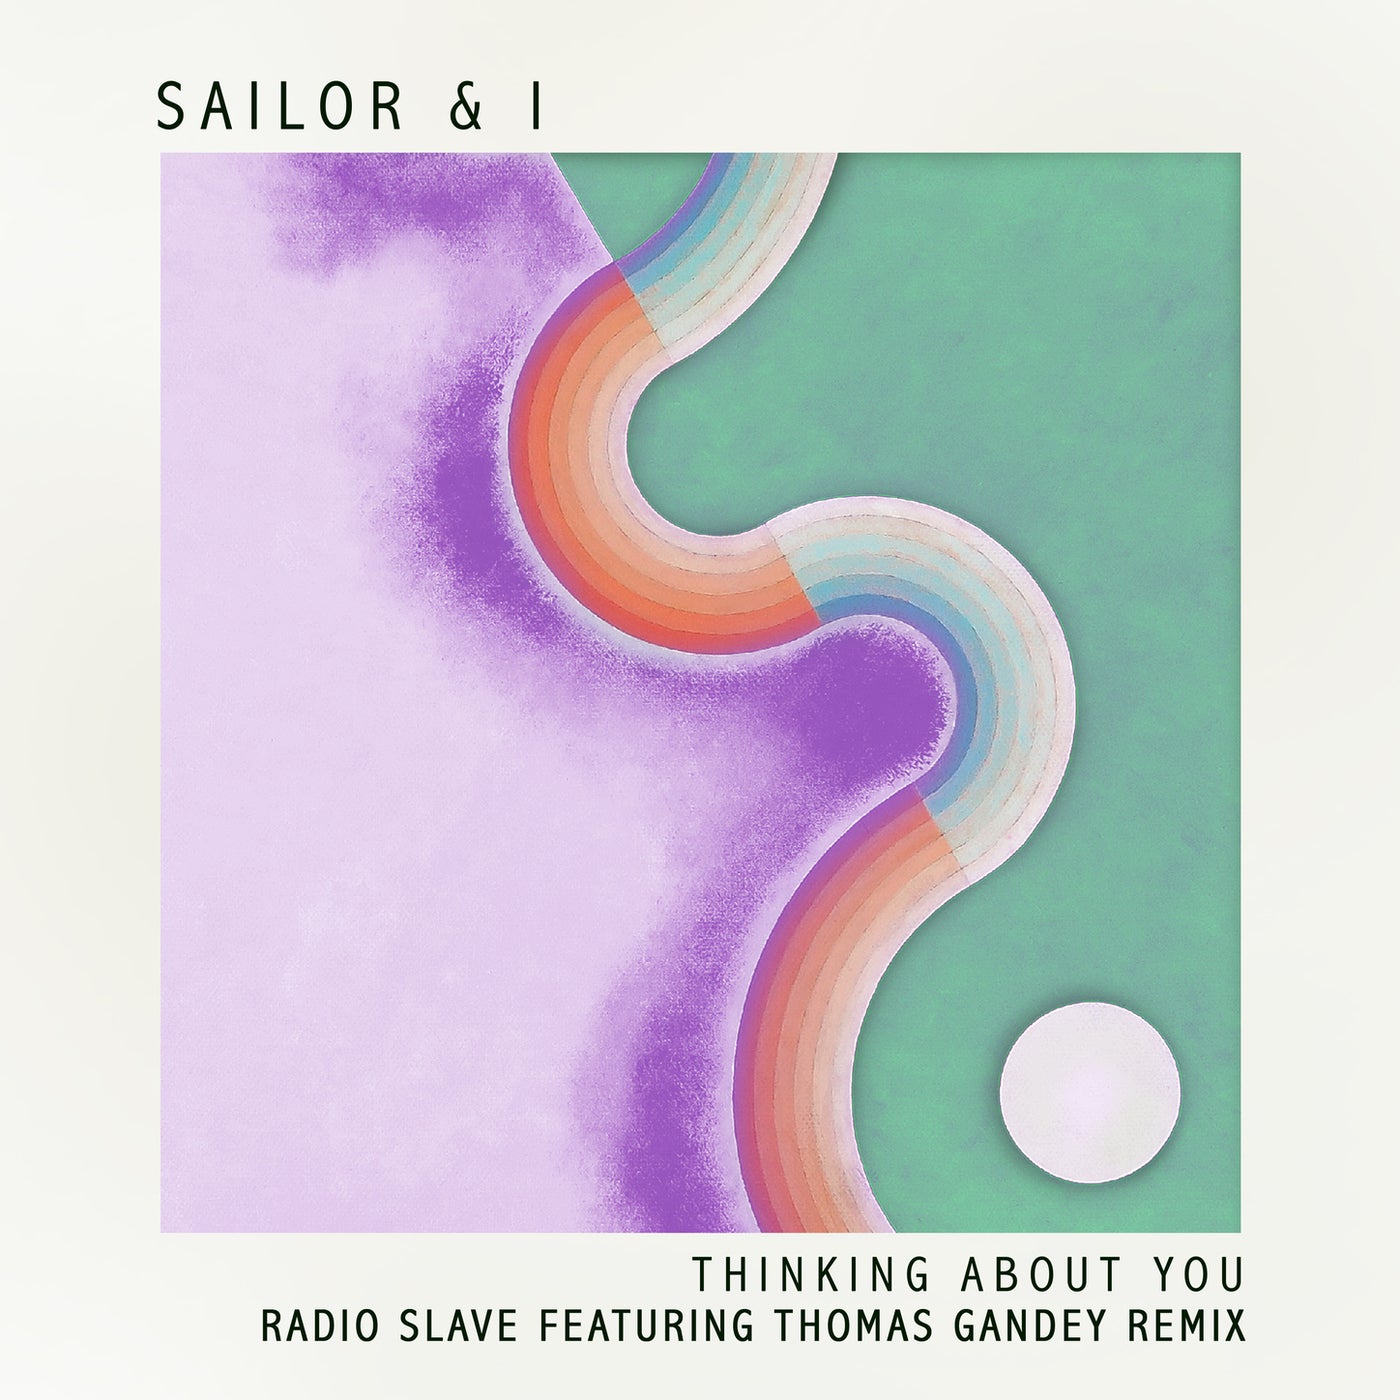 image cover: Sailor & I - Thinking About You / MP015